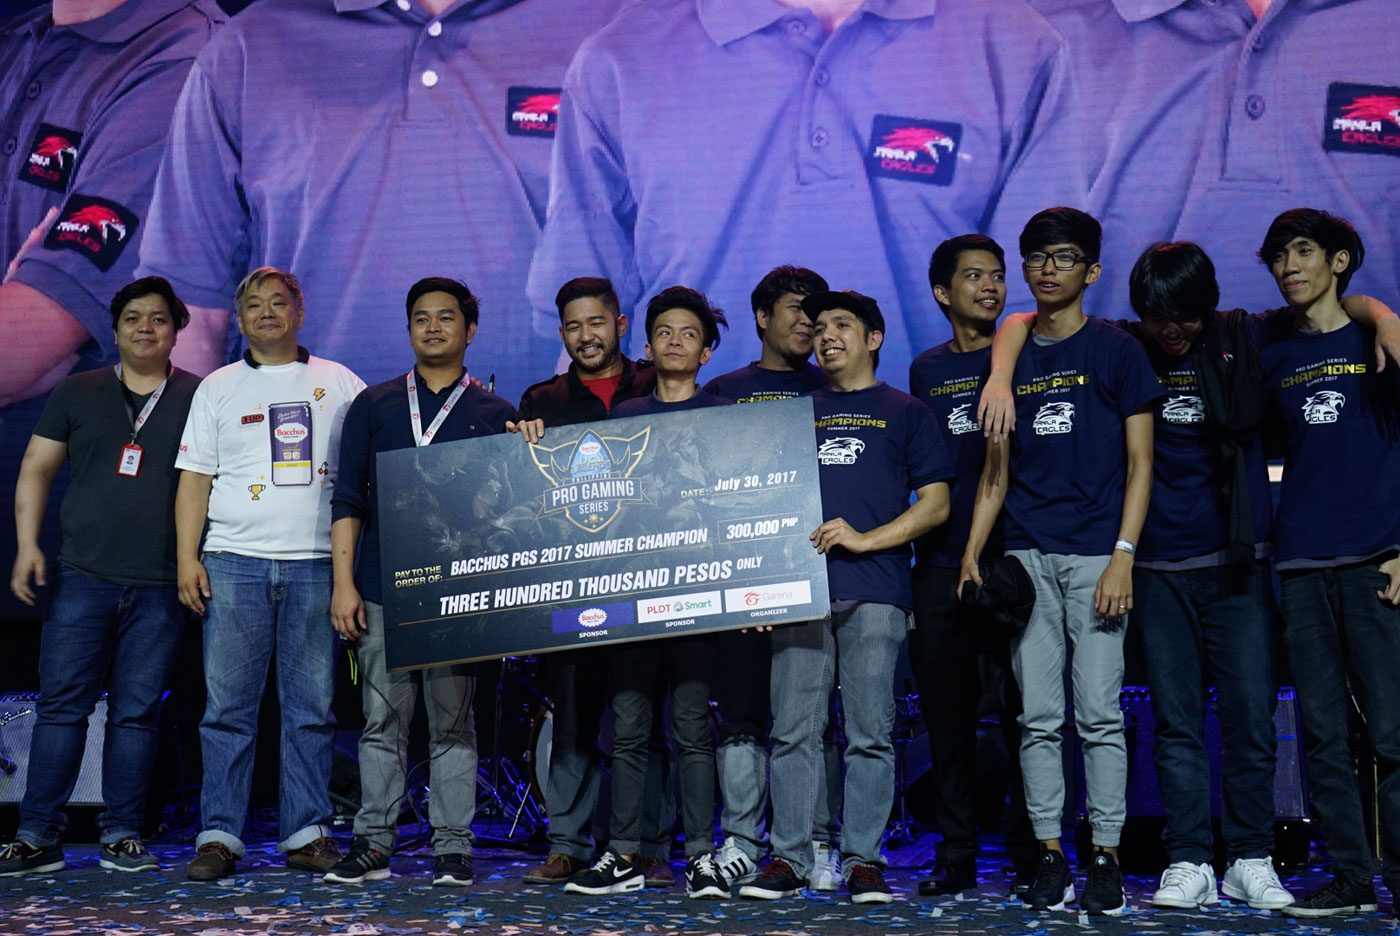 WATCH: Highlights of Rampage 2017, PH’s biggest League of Legends event